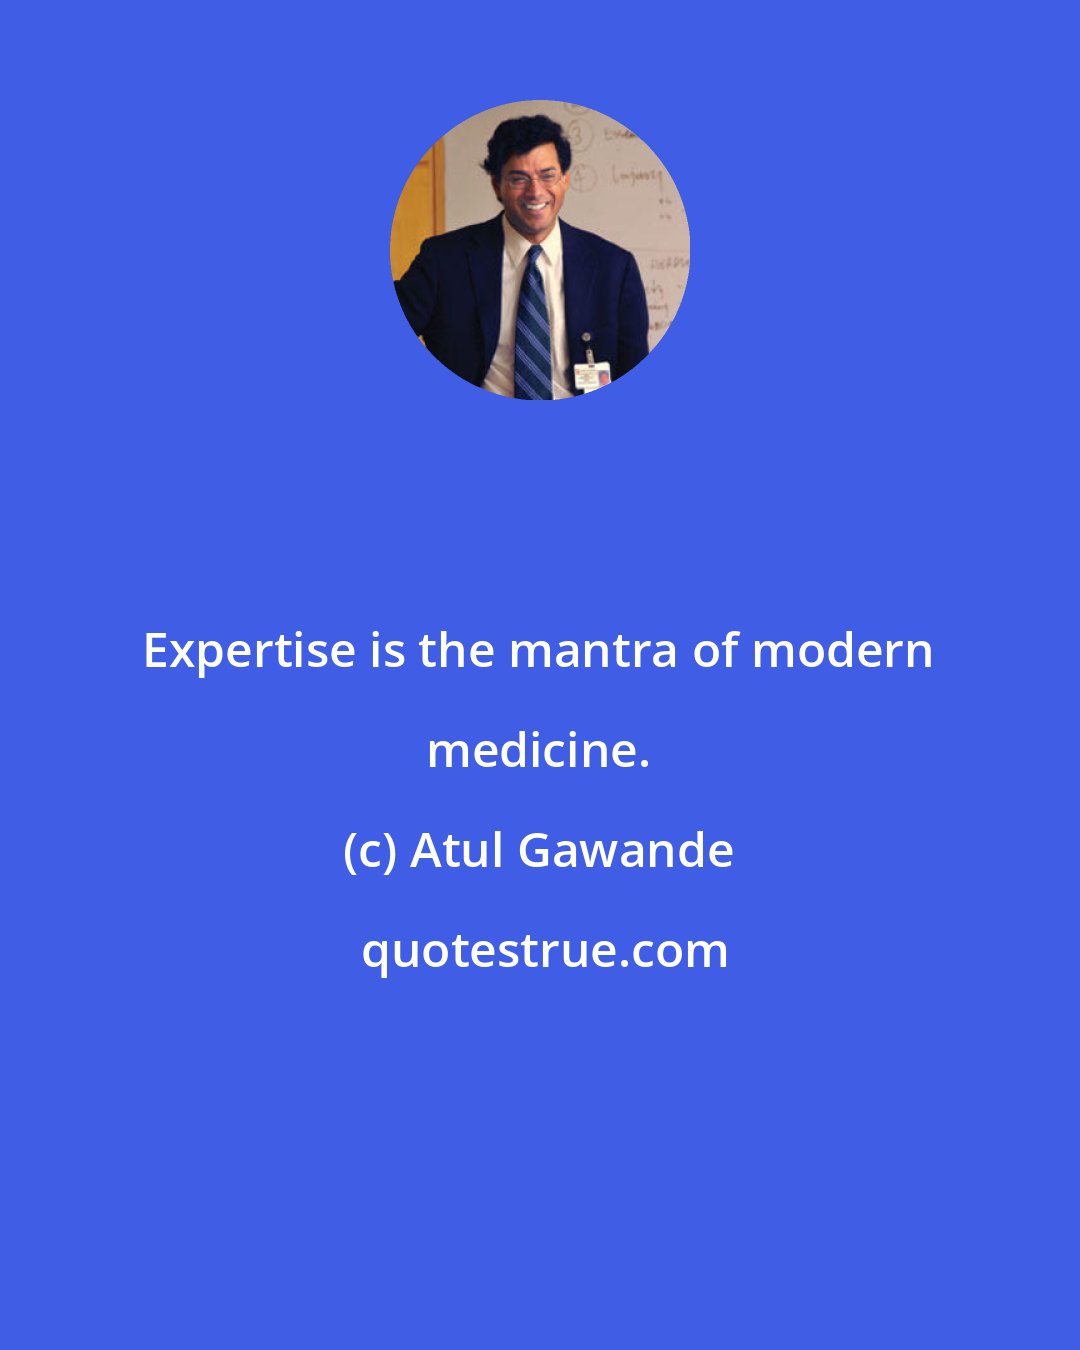 Atul Gawande: Expertise is the mantra of modern medicine.